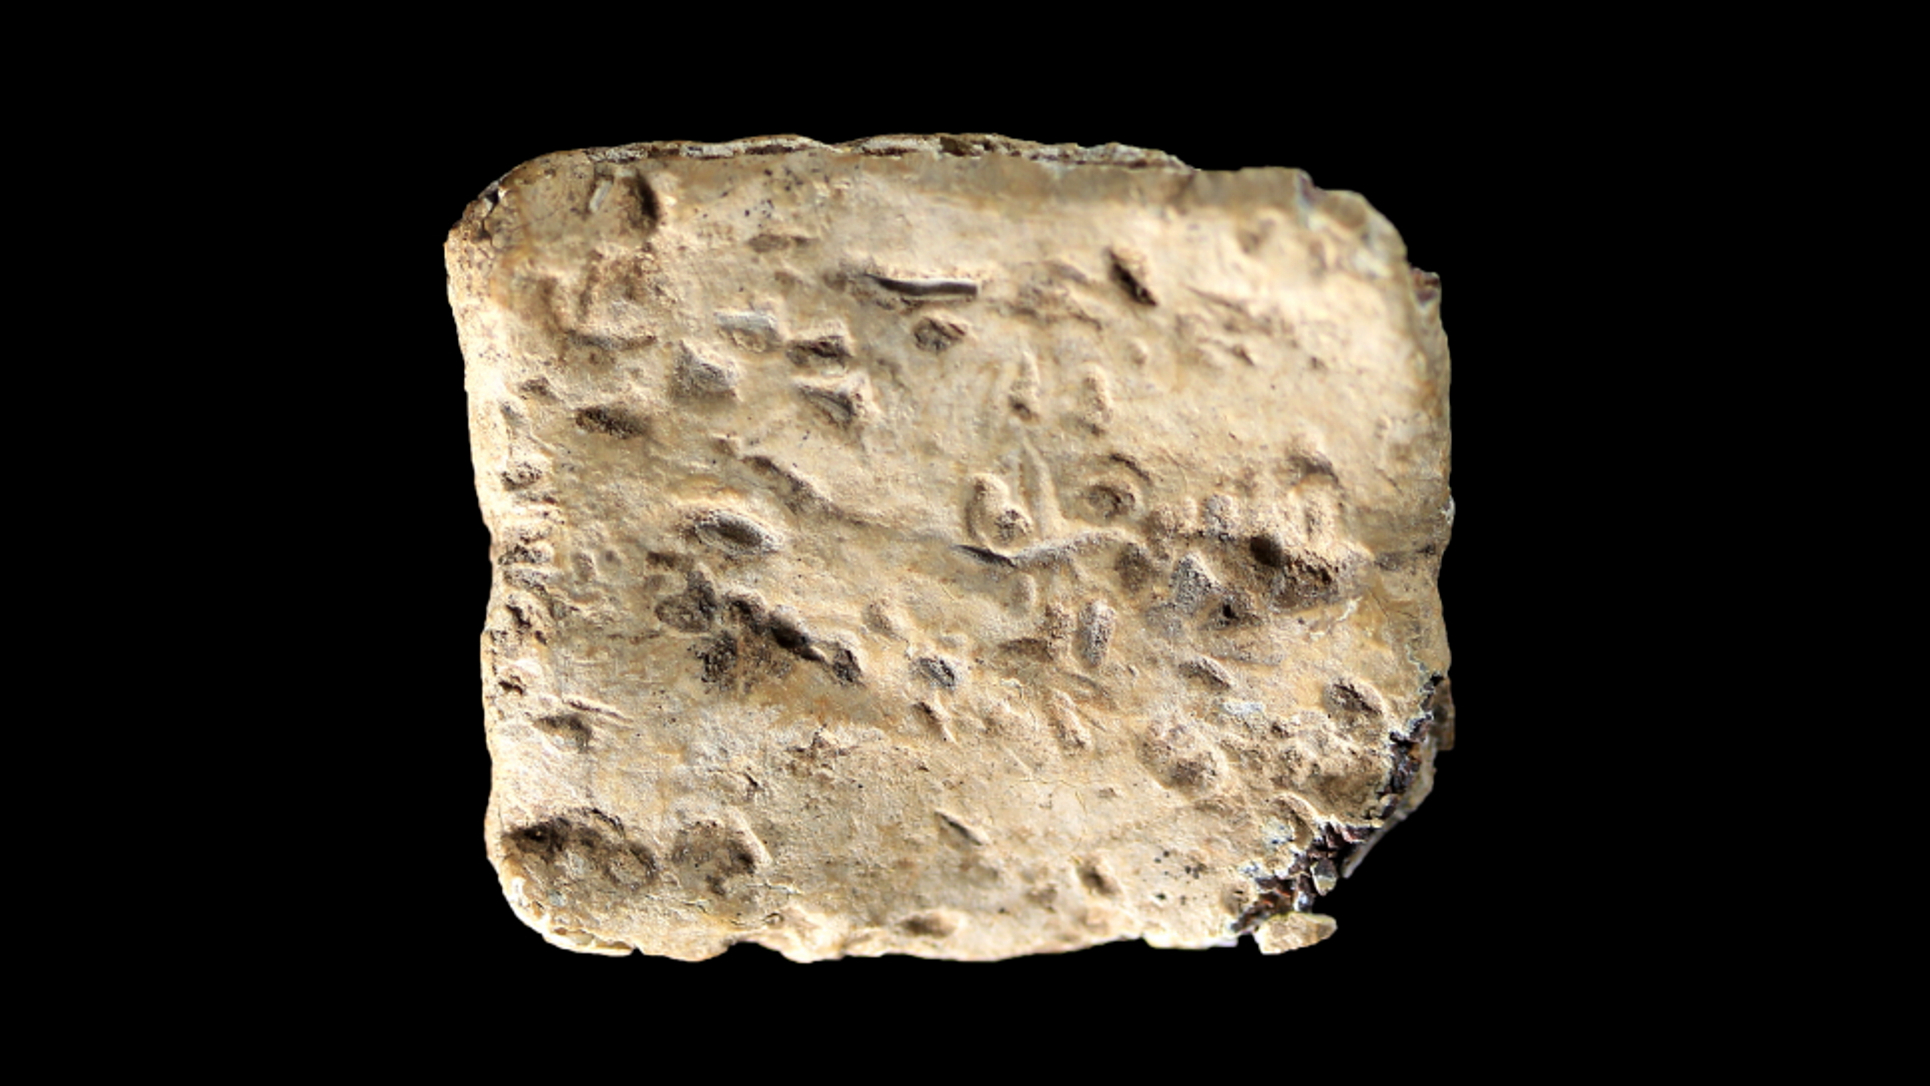 Archaeologists found the curse tablet by sifting through a pile of debris that had been removed during archaeological excavations on Mount Ebal in the West Bank in the 1980s.